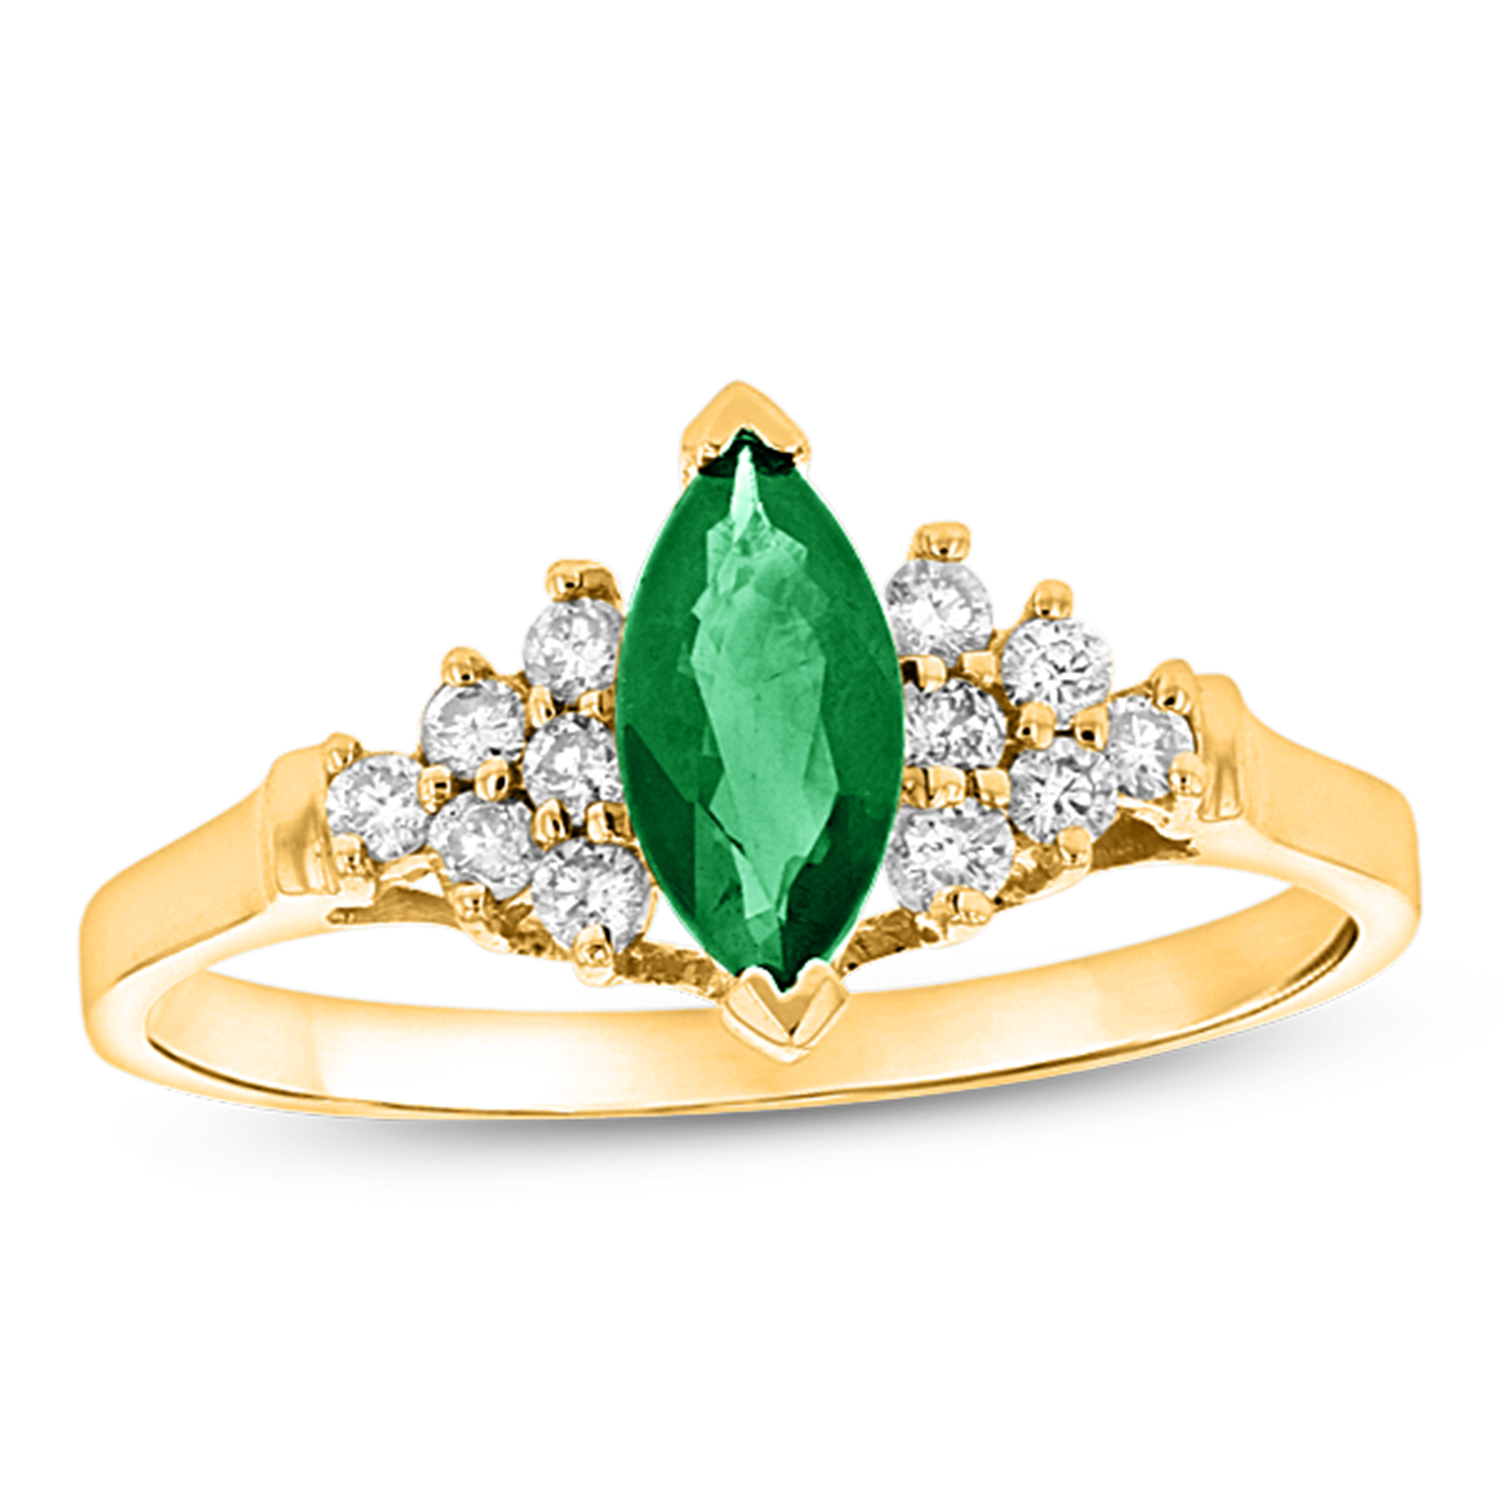 View 0.69ctw Diamond and Marquis Emerald Ring in 14k Yellow Gold